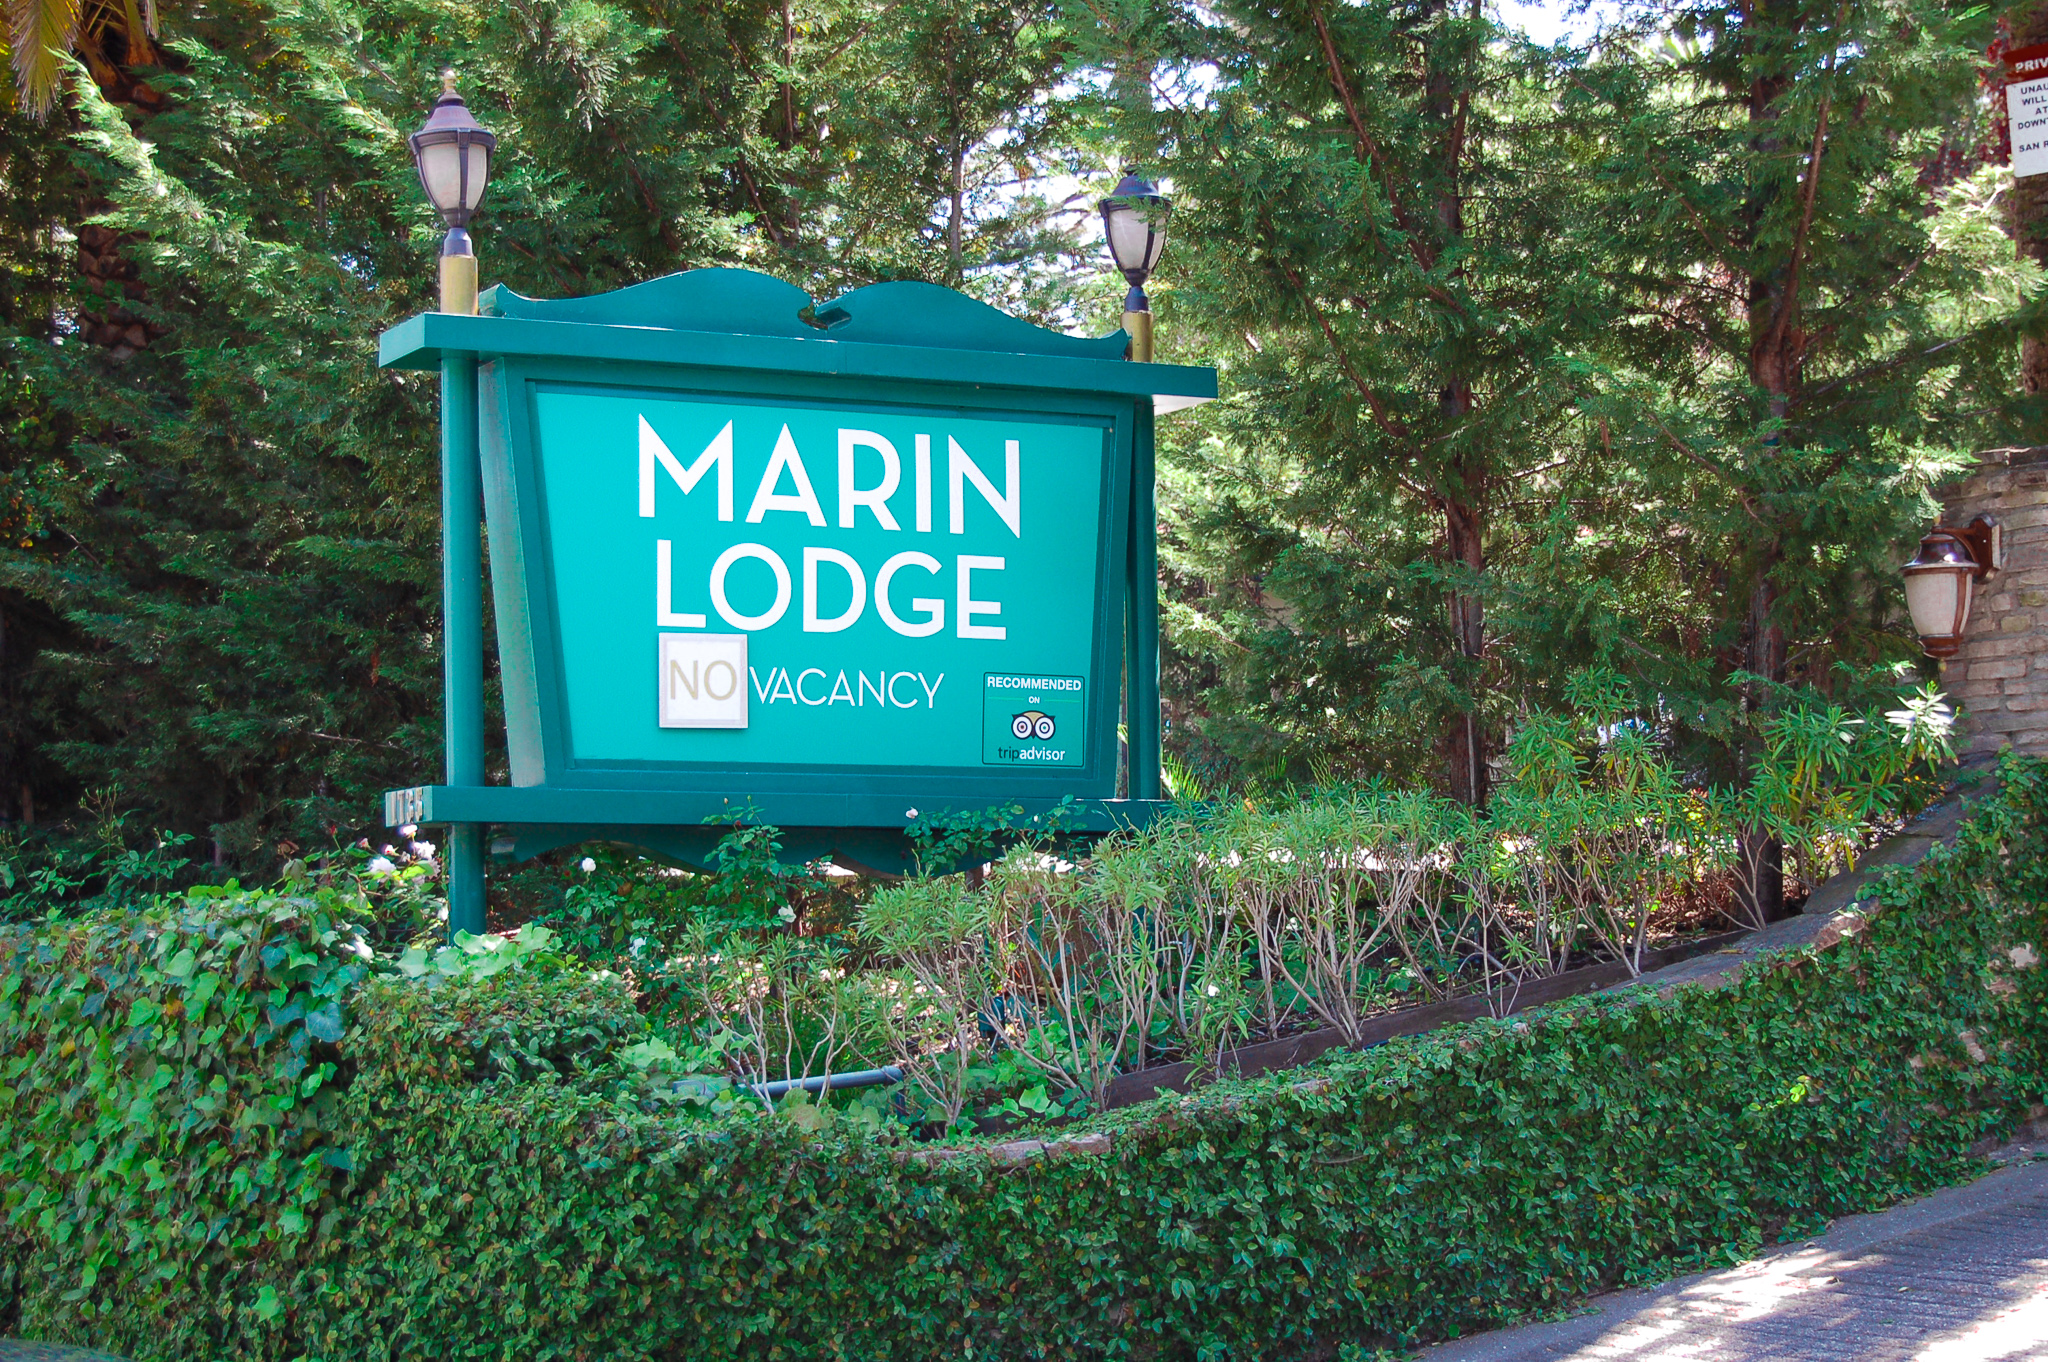 Marin Lodge welcome sign